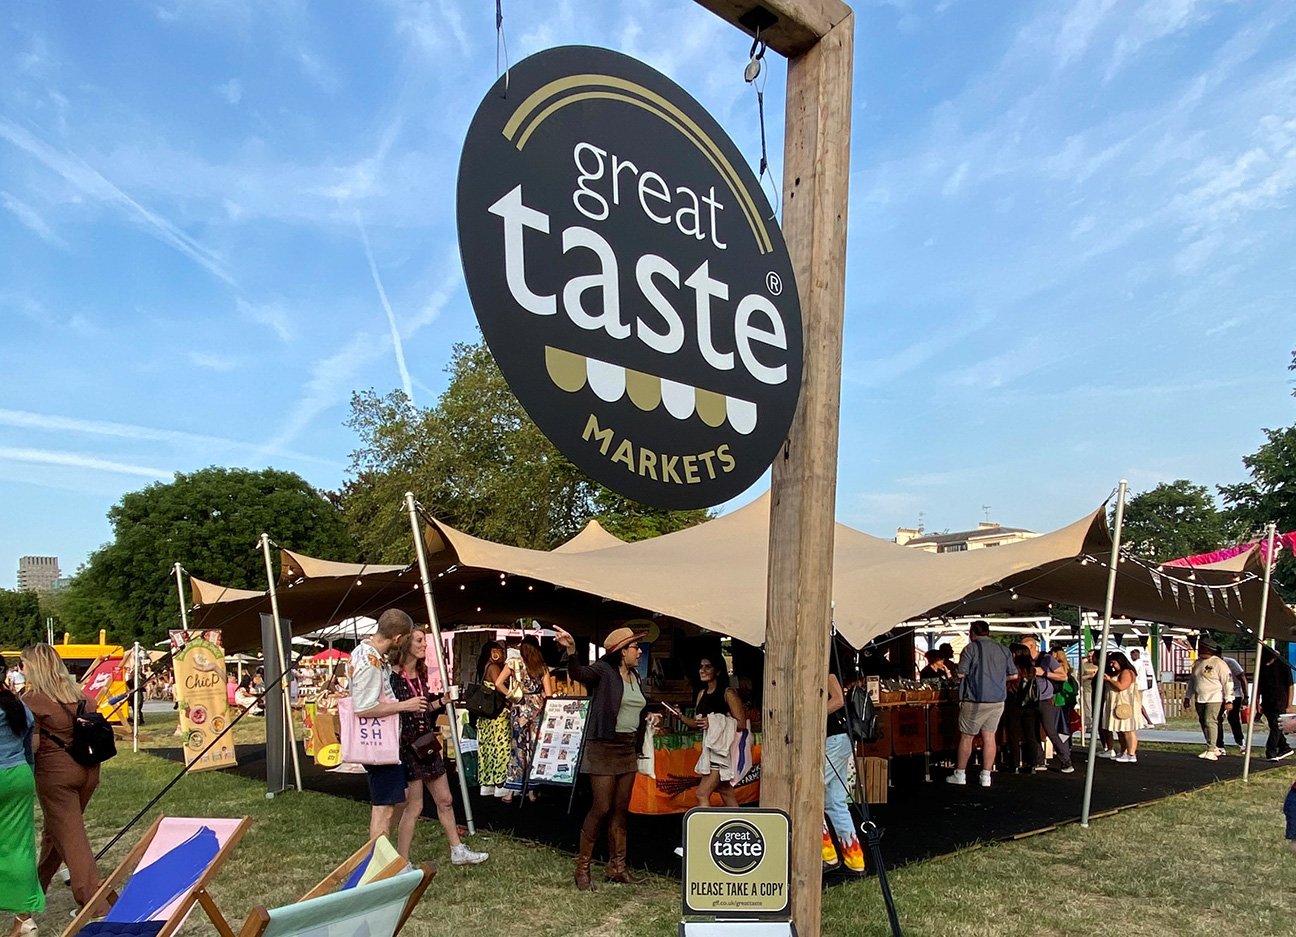 Showcase your award-winning product at a Great Taste Market this summer